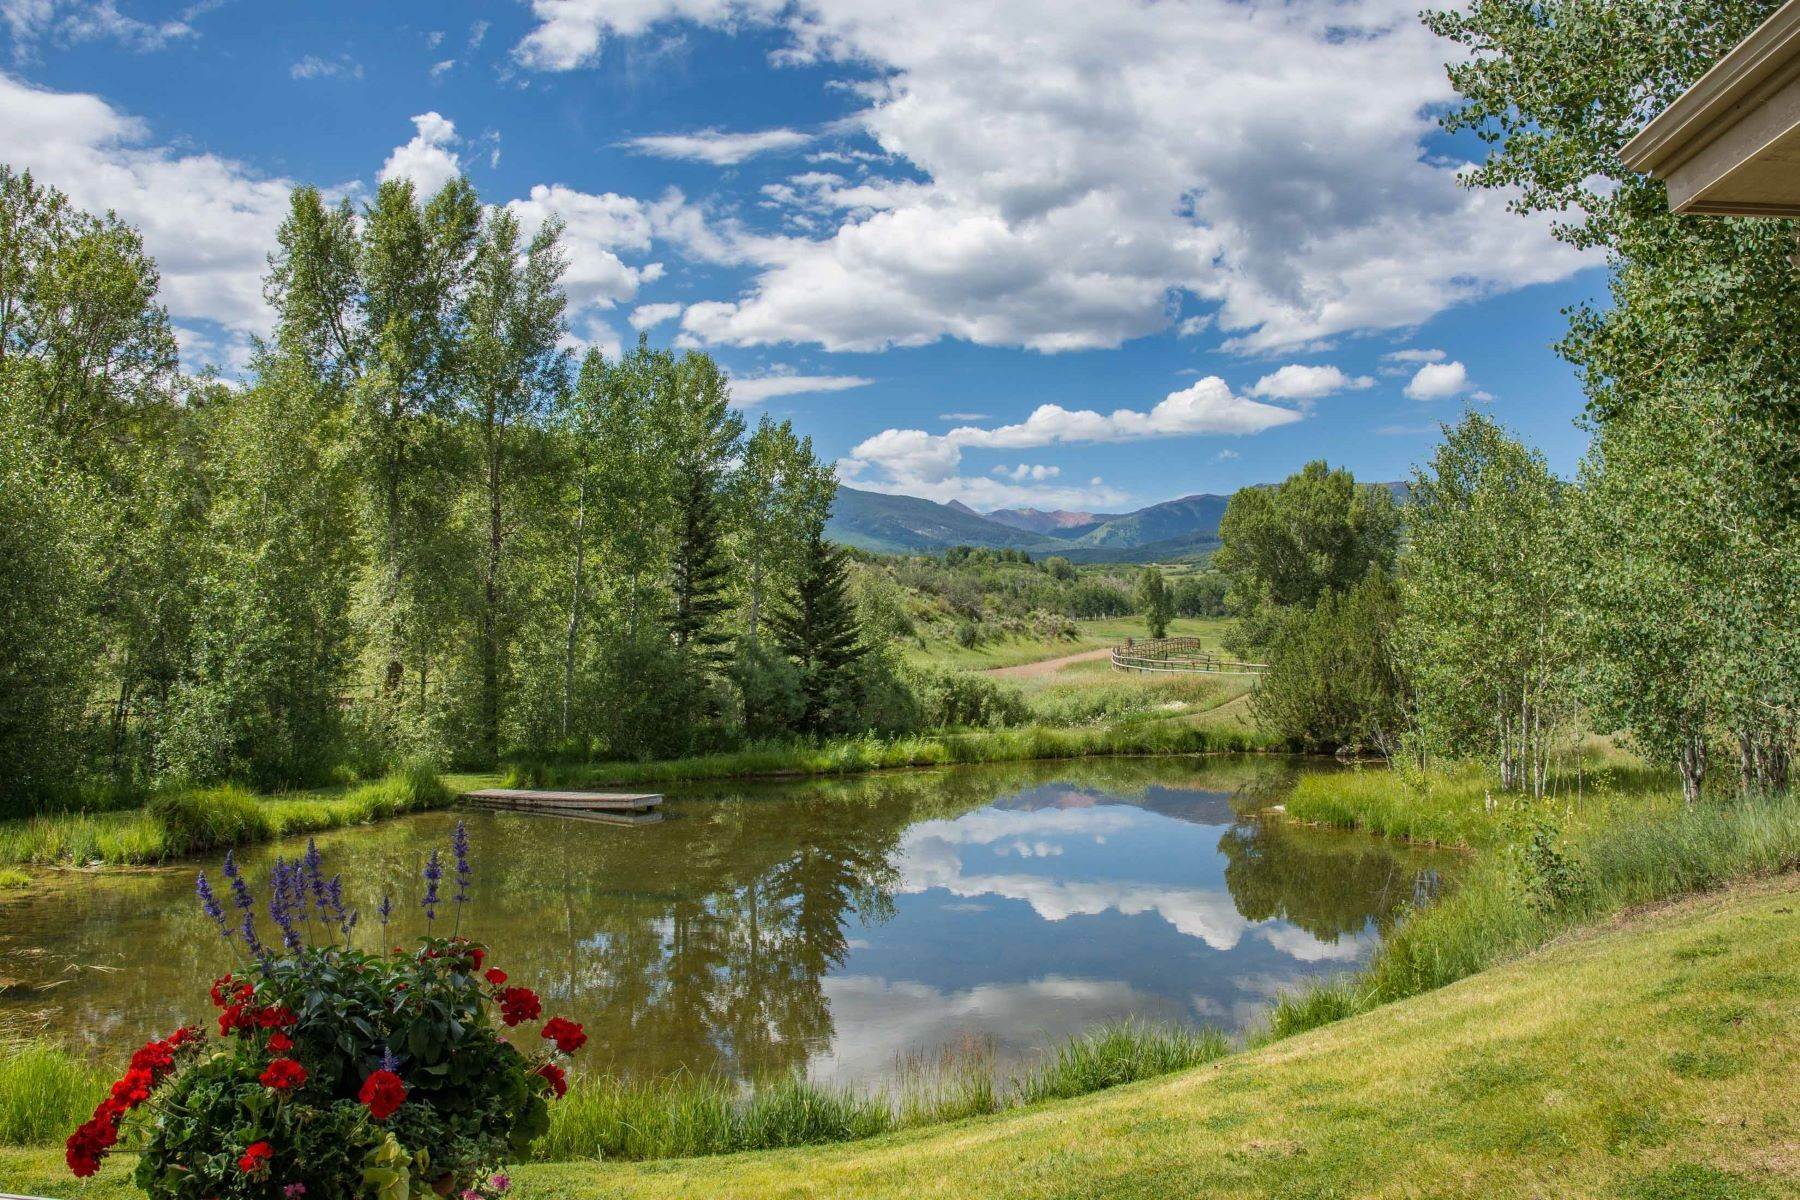 Farm and Ranch Properties para Venda às RARE and UNIQUE opportunity to own the heart of the renowned McCabe Ranch! 1321 Elk Creek & TBD McCabe Ranch, Old Snowmass, Colorado 81654 Estados Unidos